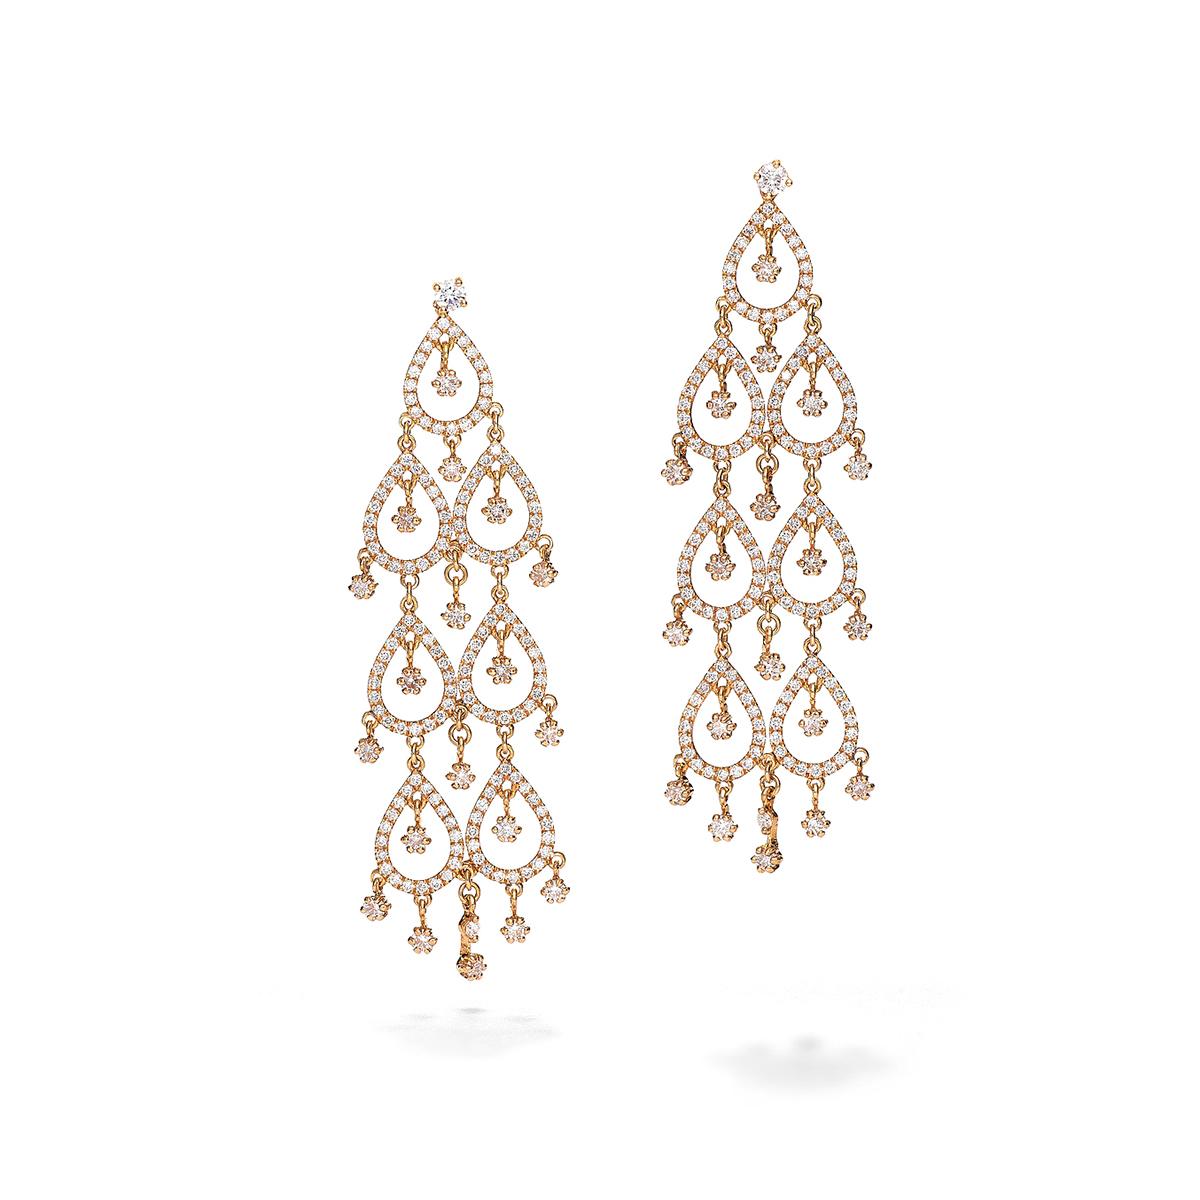 Earrings in 18kt pink gold set with 322 diamonds 4.99 cts